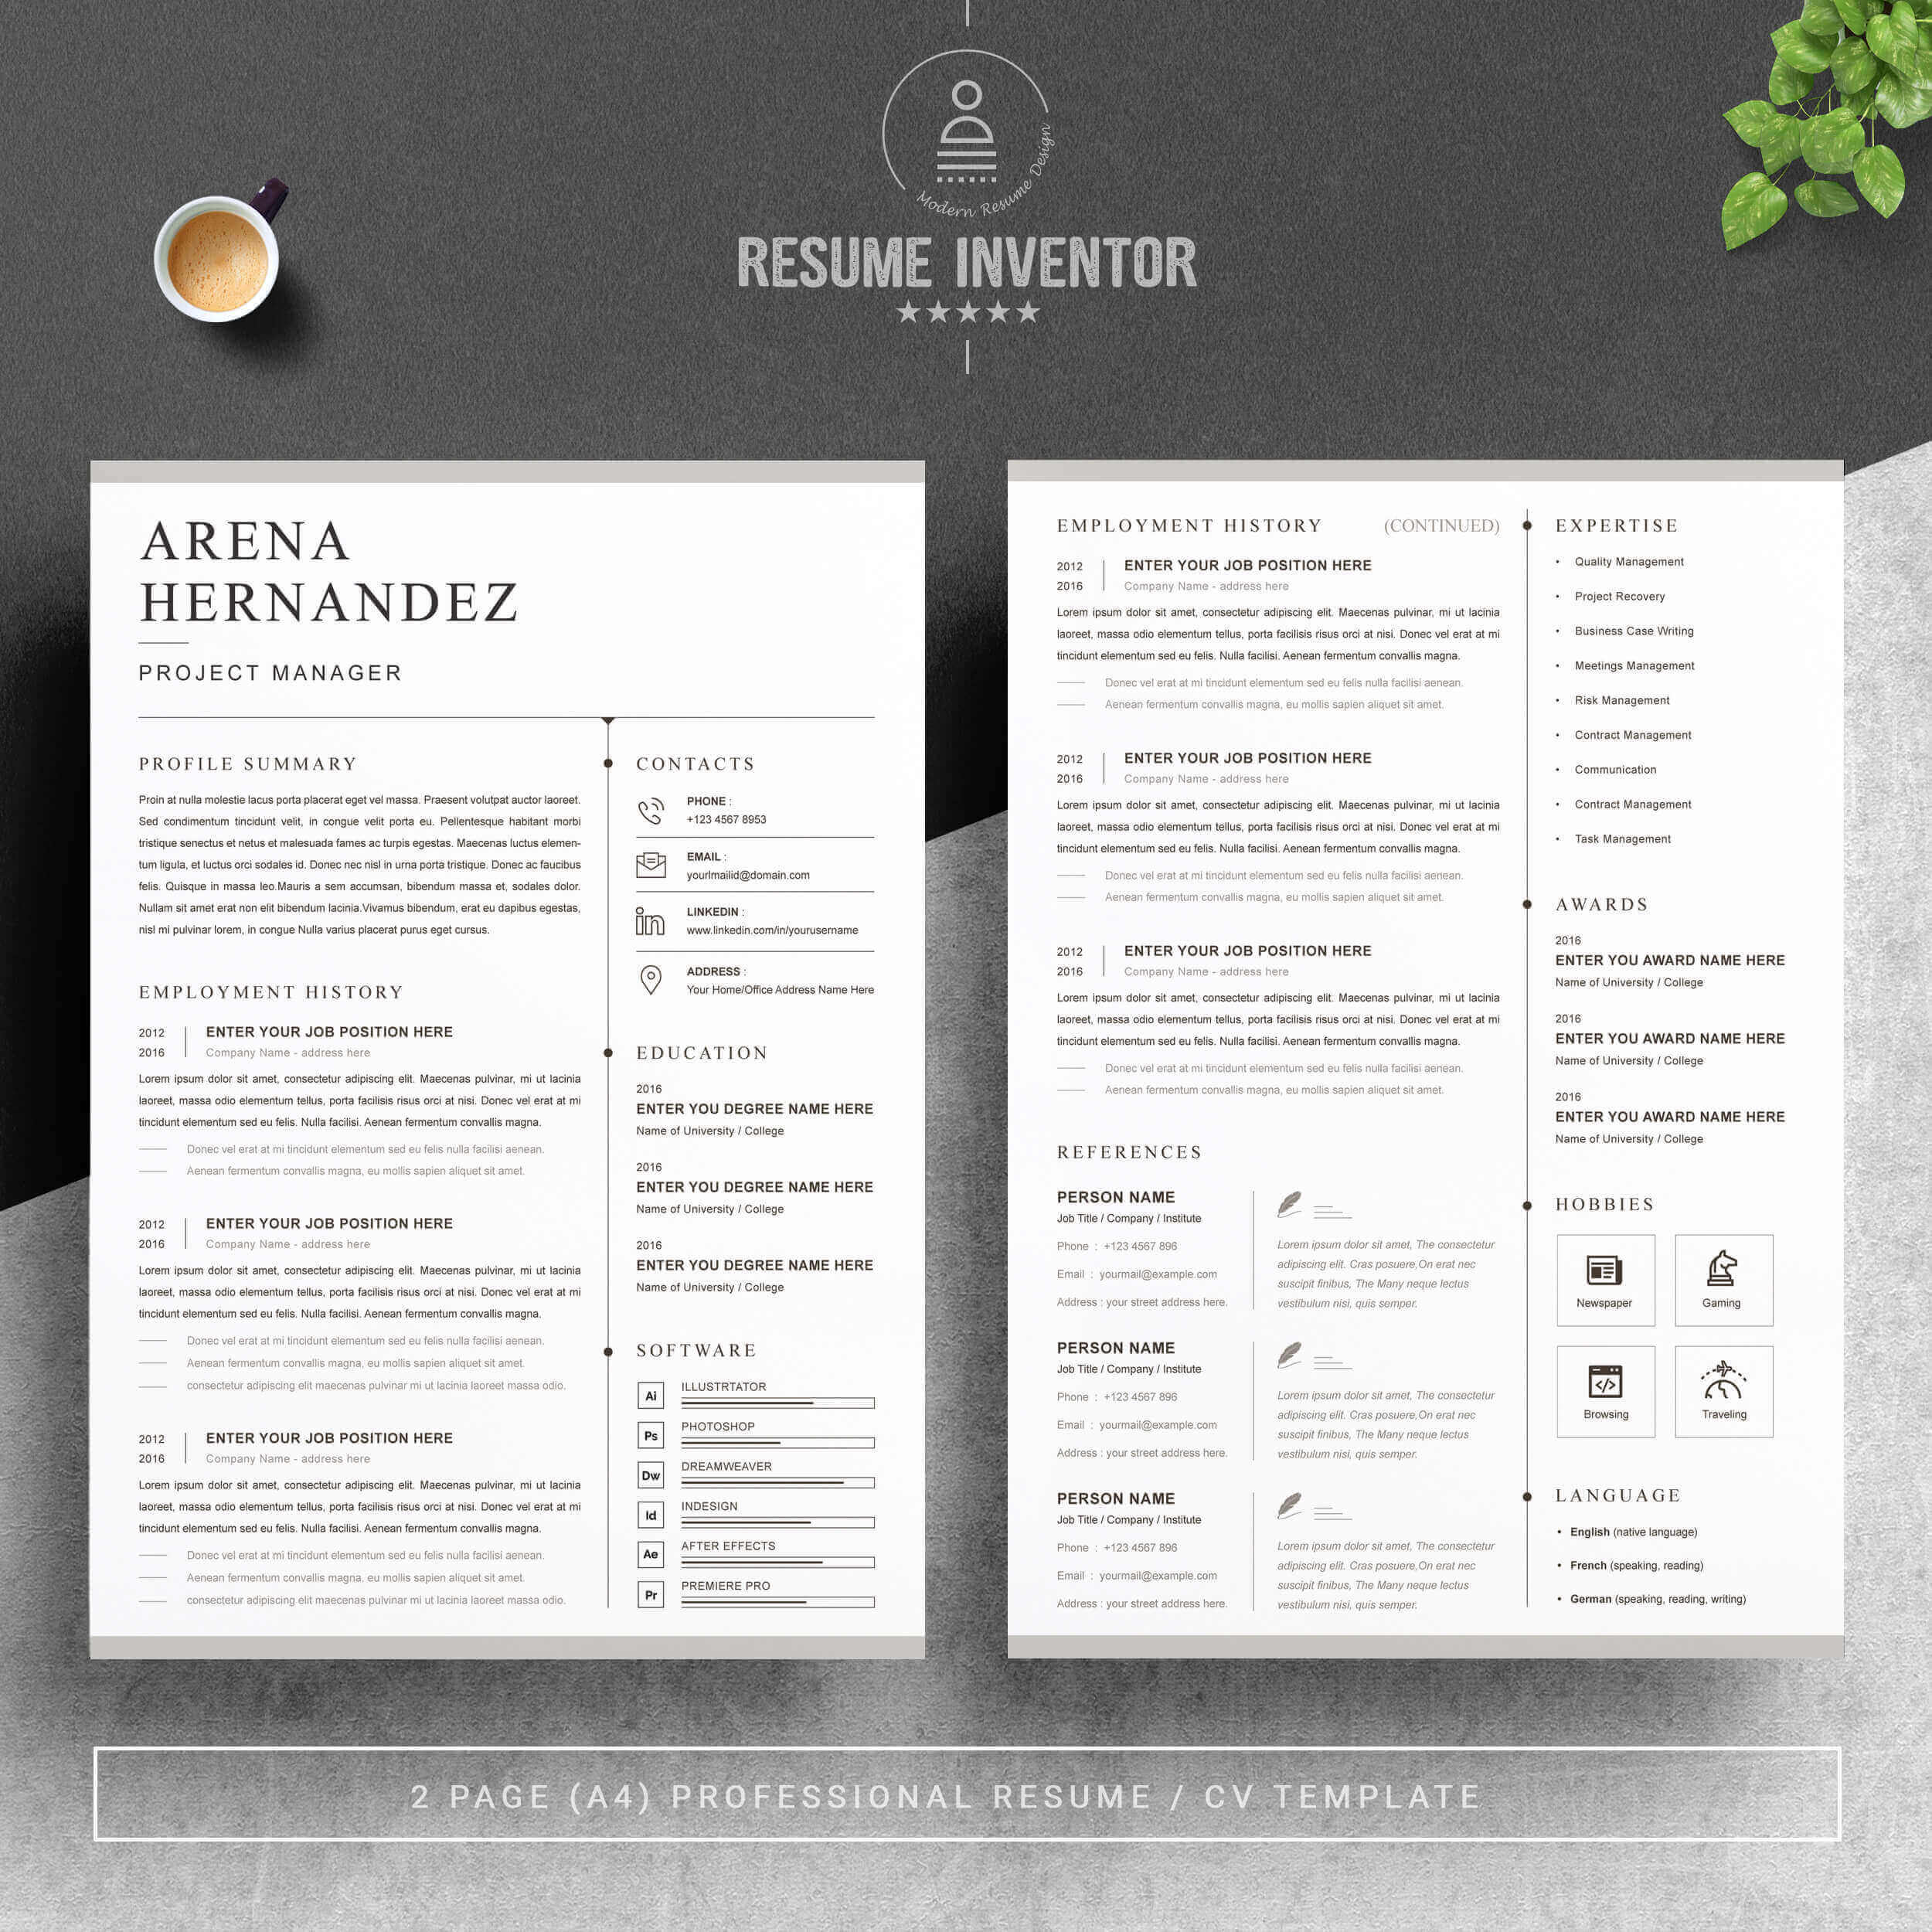 Project Manager Resume Template | Microsoft Word Resume Template preview image.